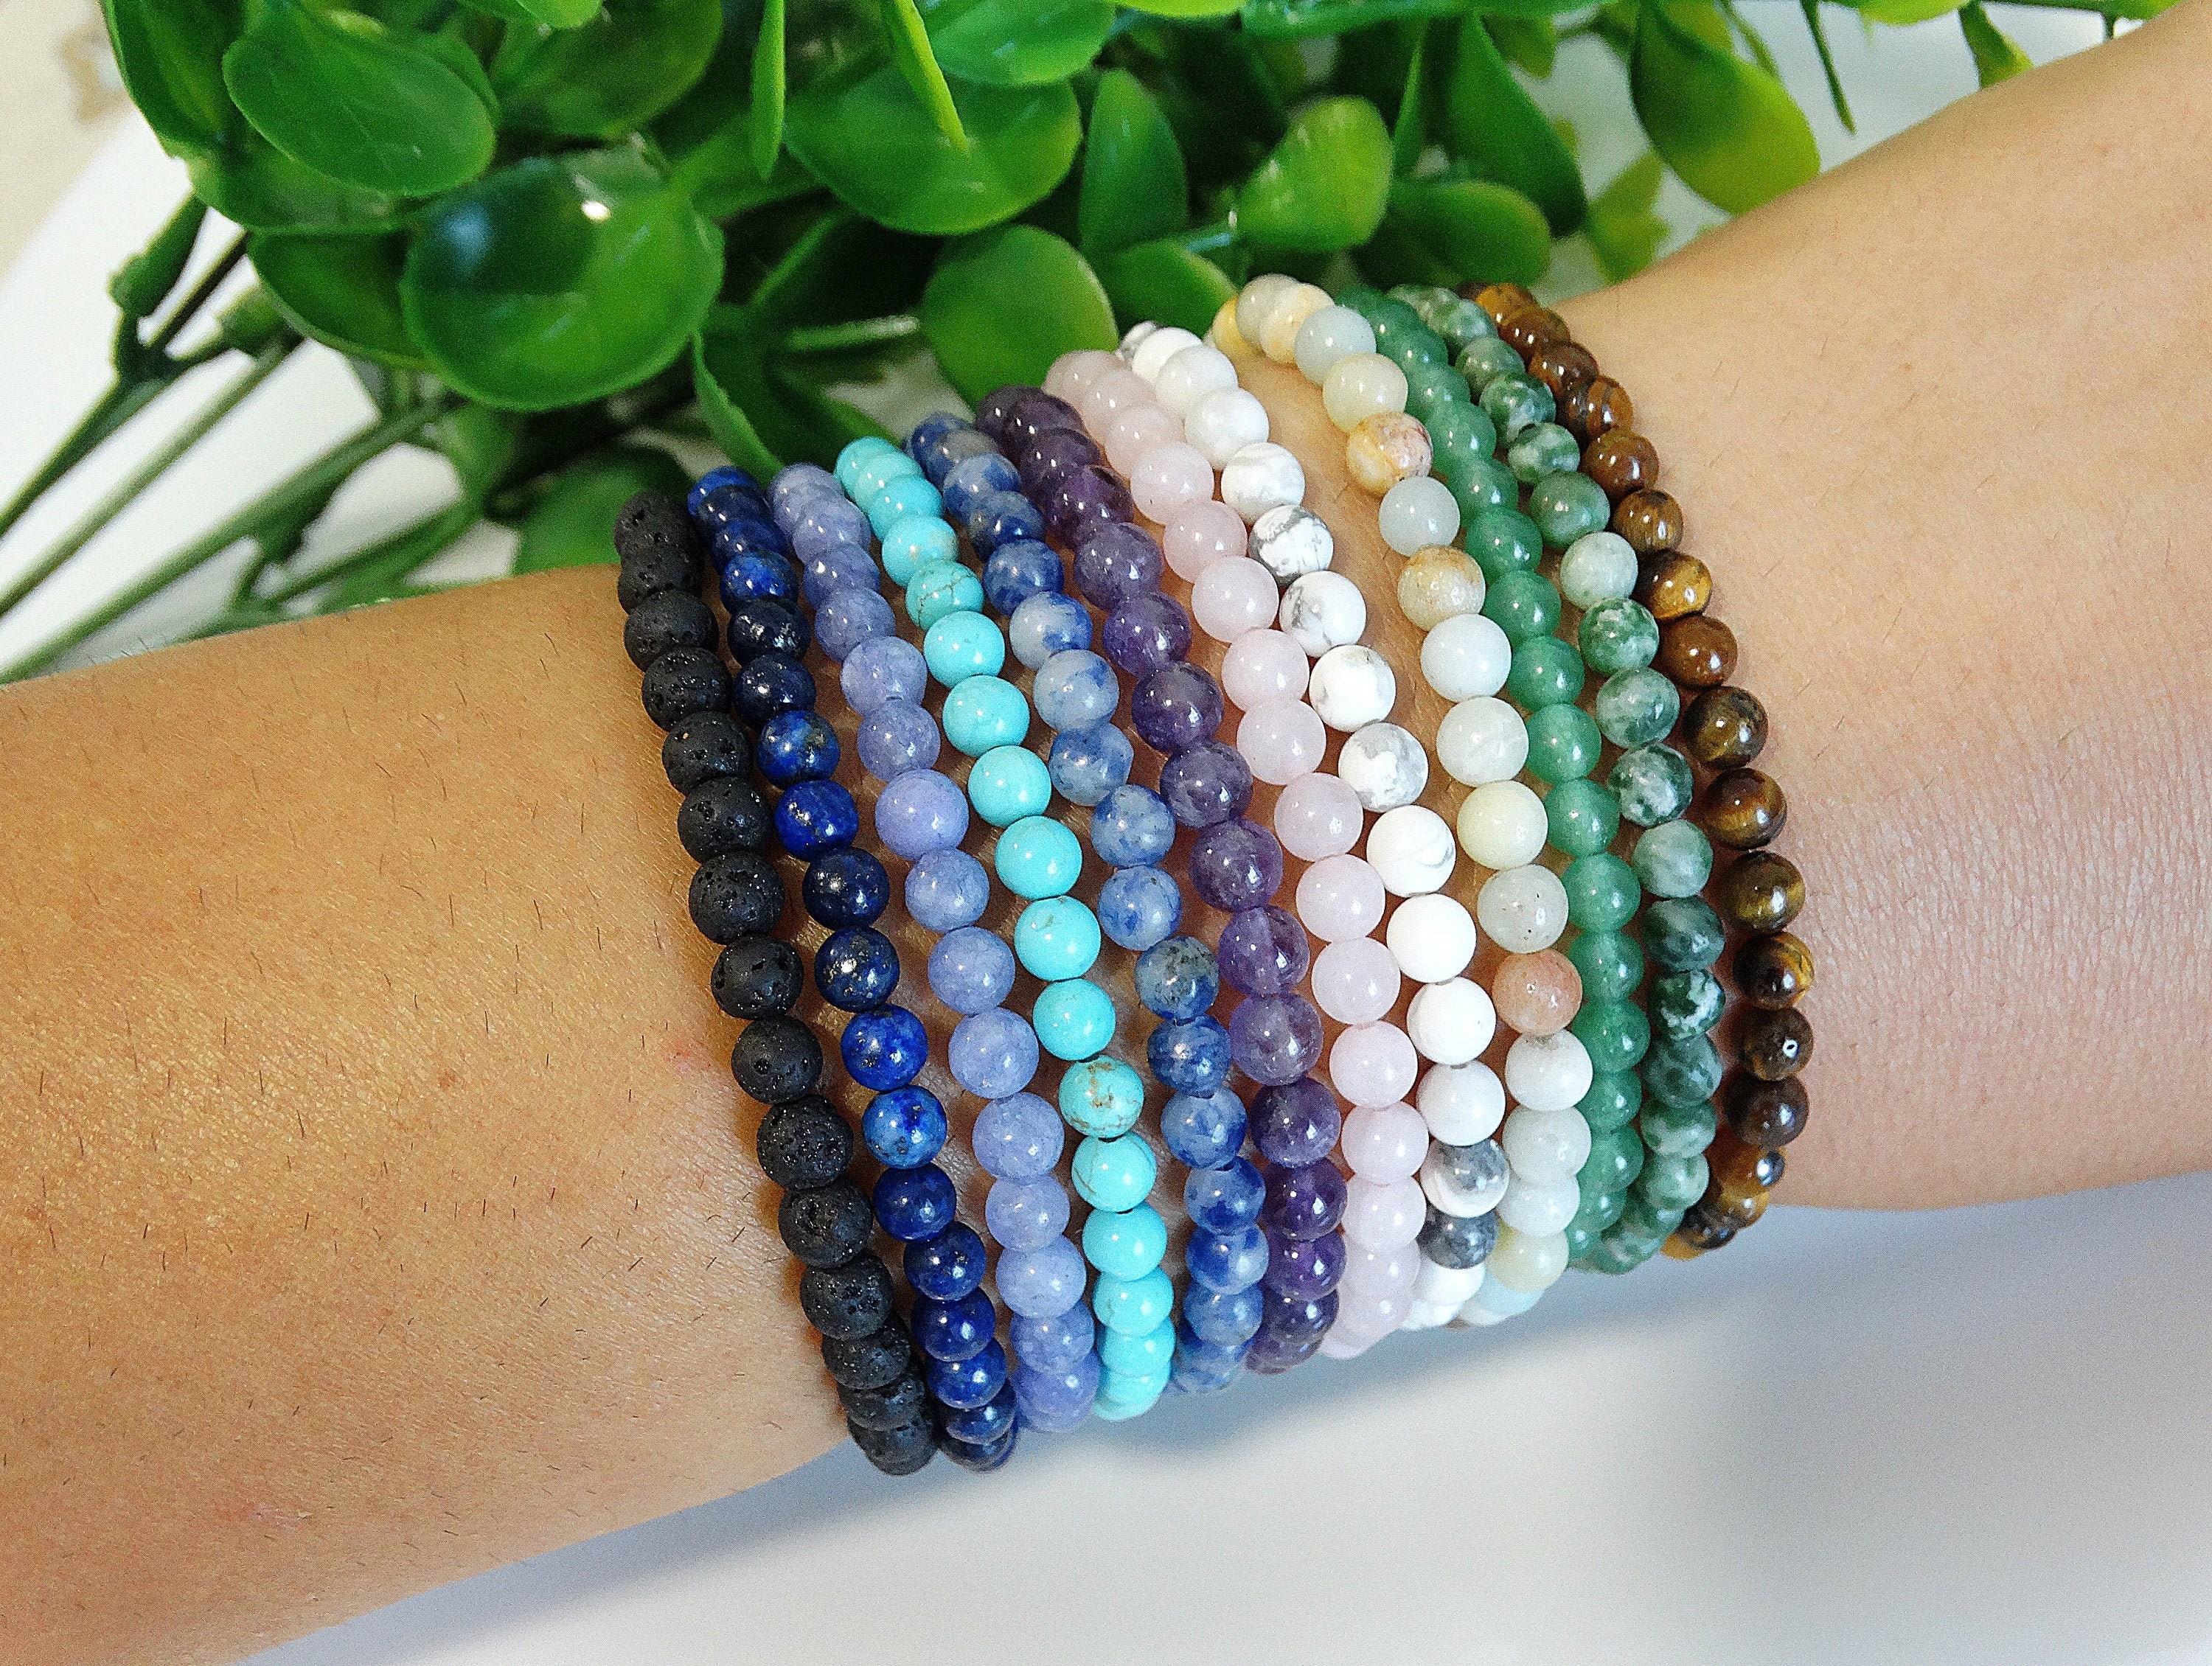 Bling Small 4mm Crystal Bead Bracelets | 13 Colors | Womens One Turquoise Blue